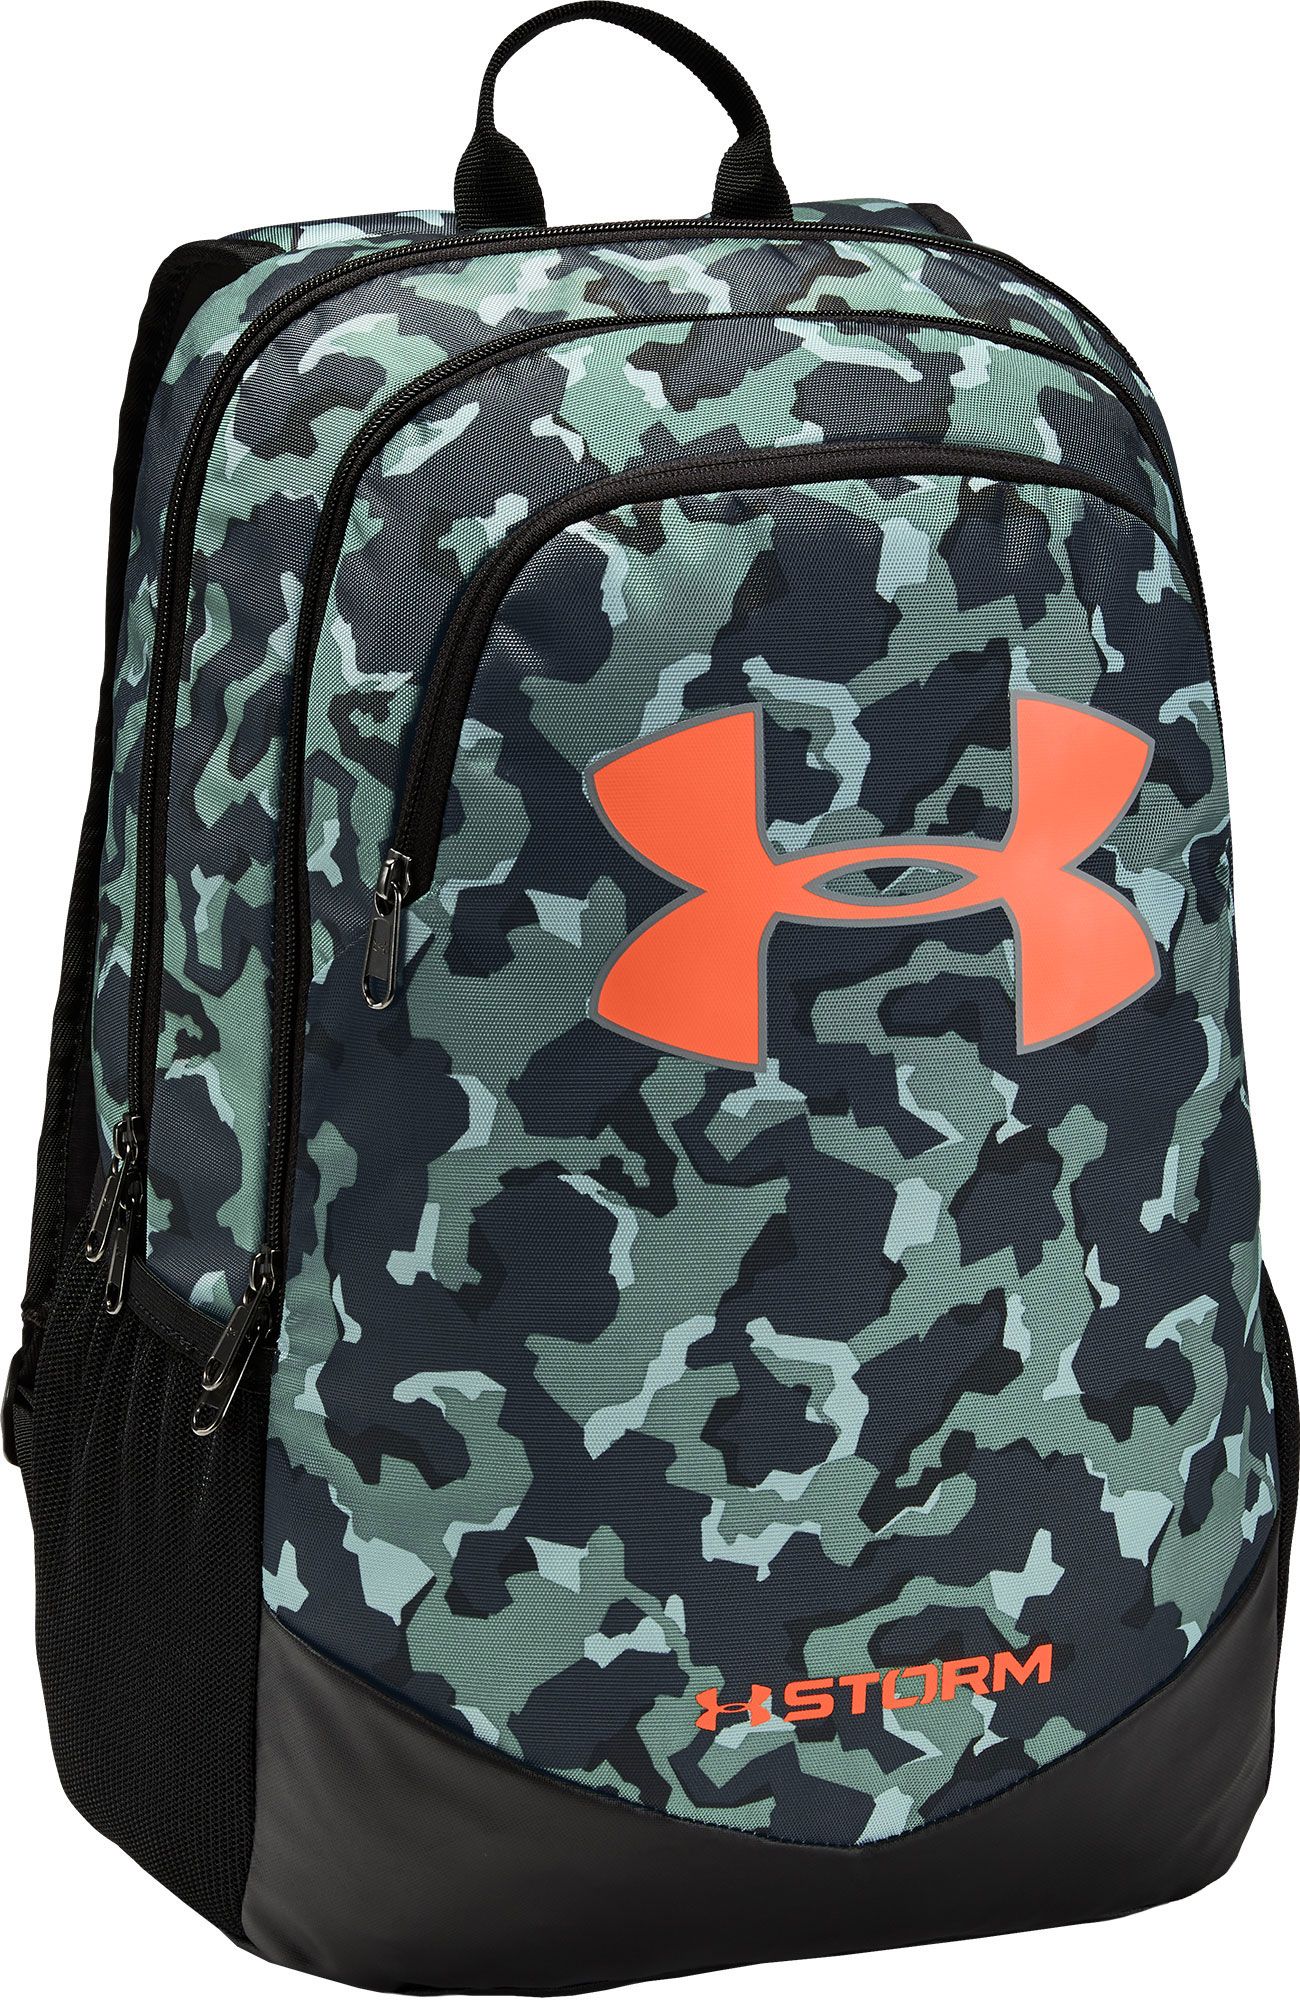 Under Armour Youth Scrimmage Backpack 